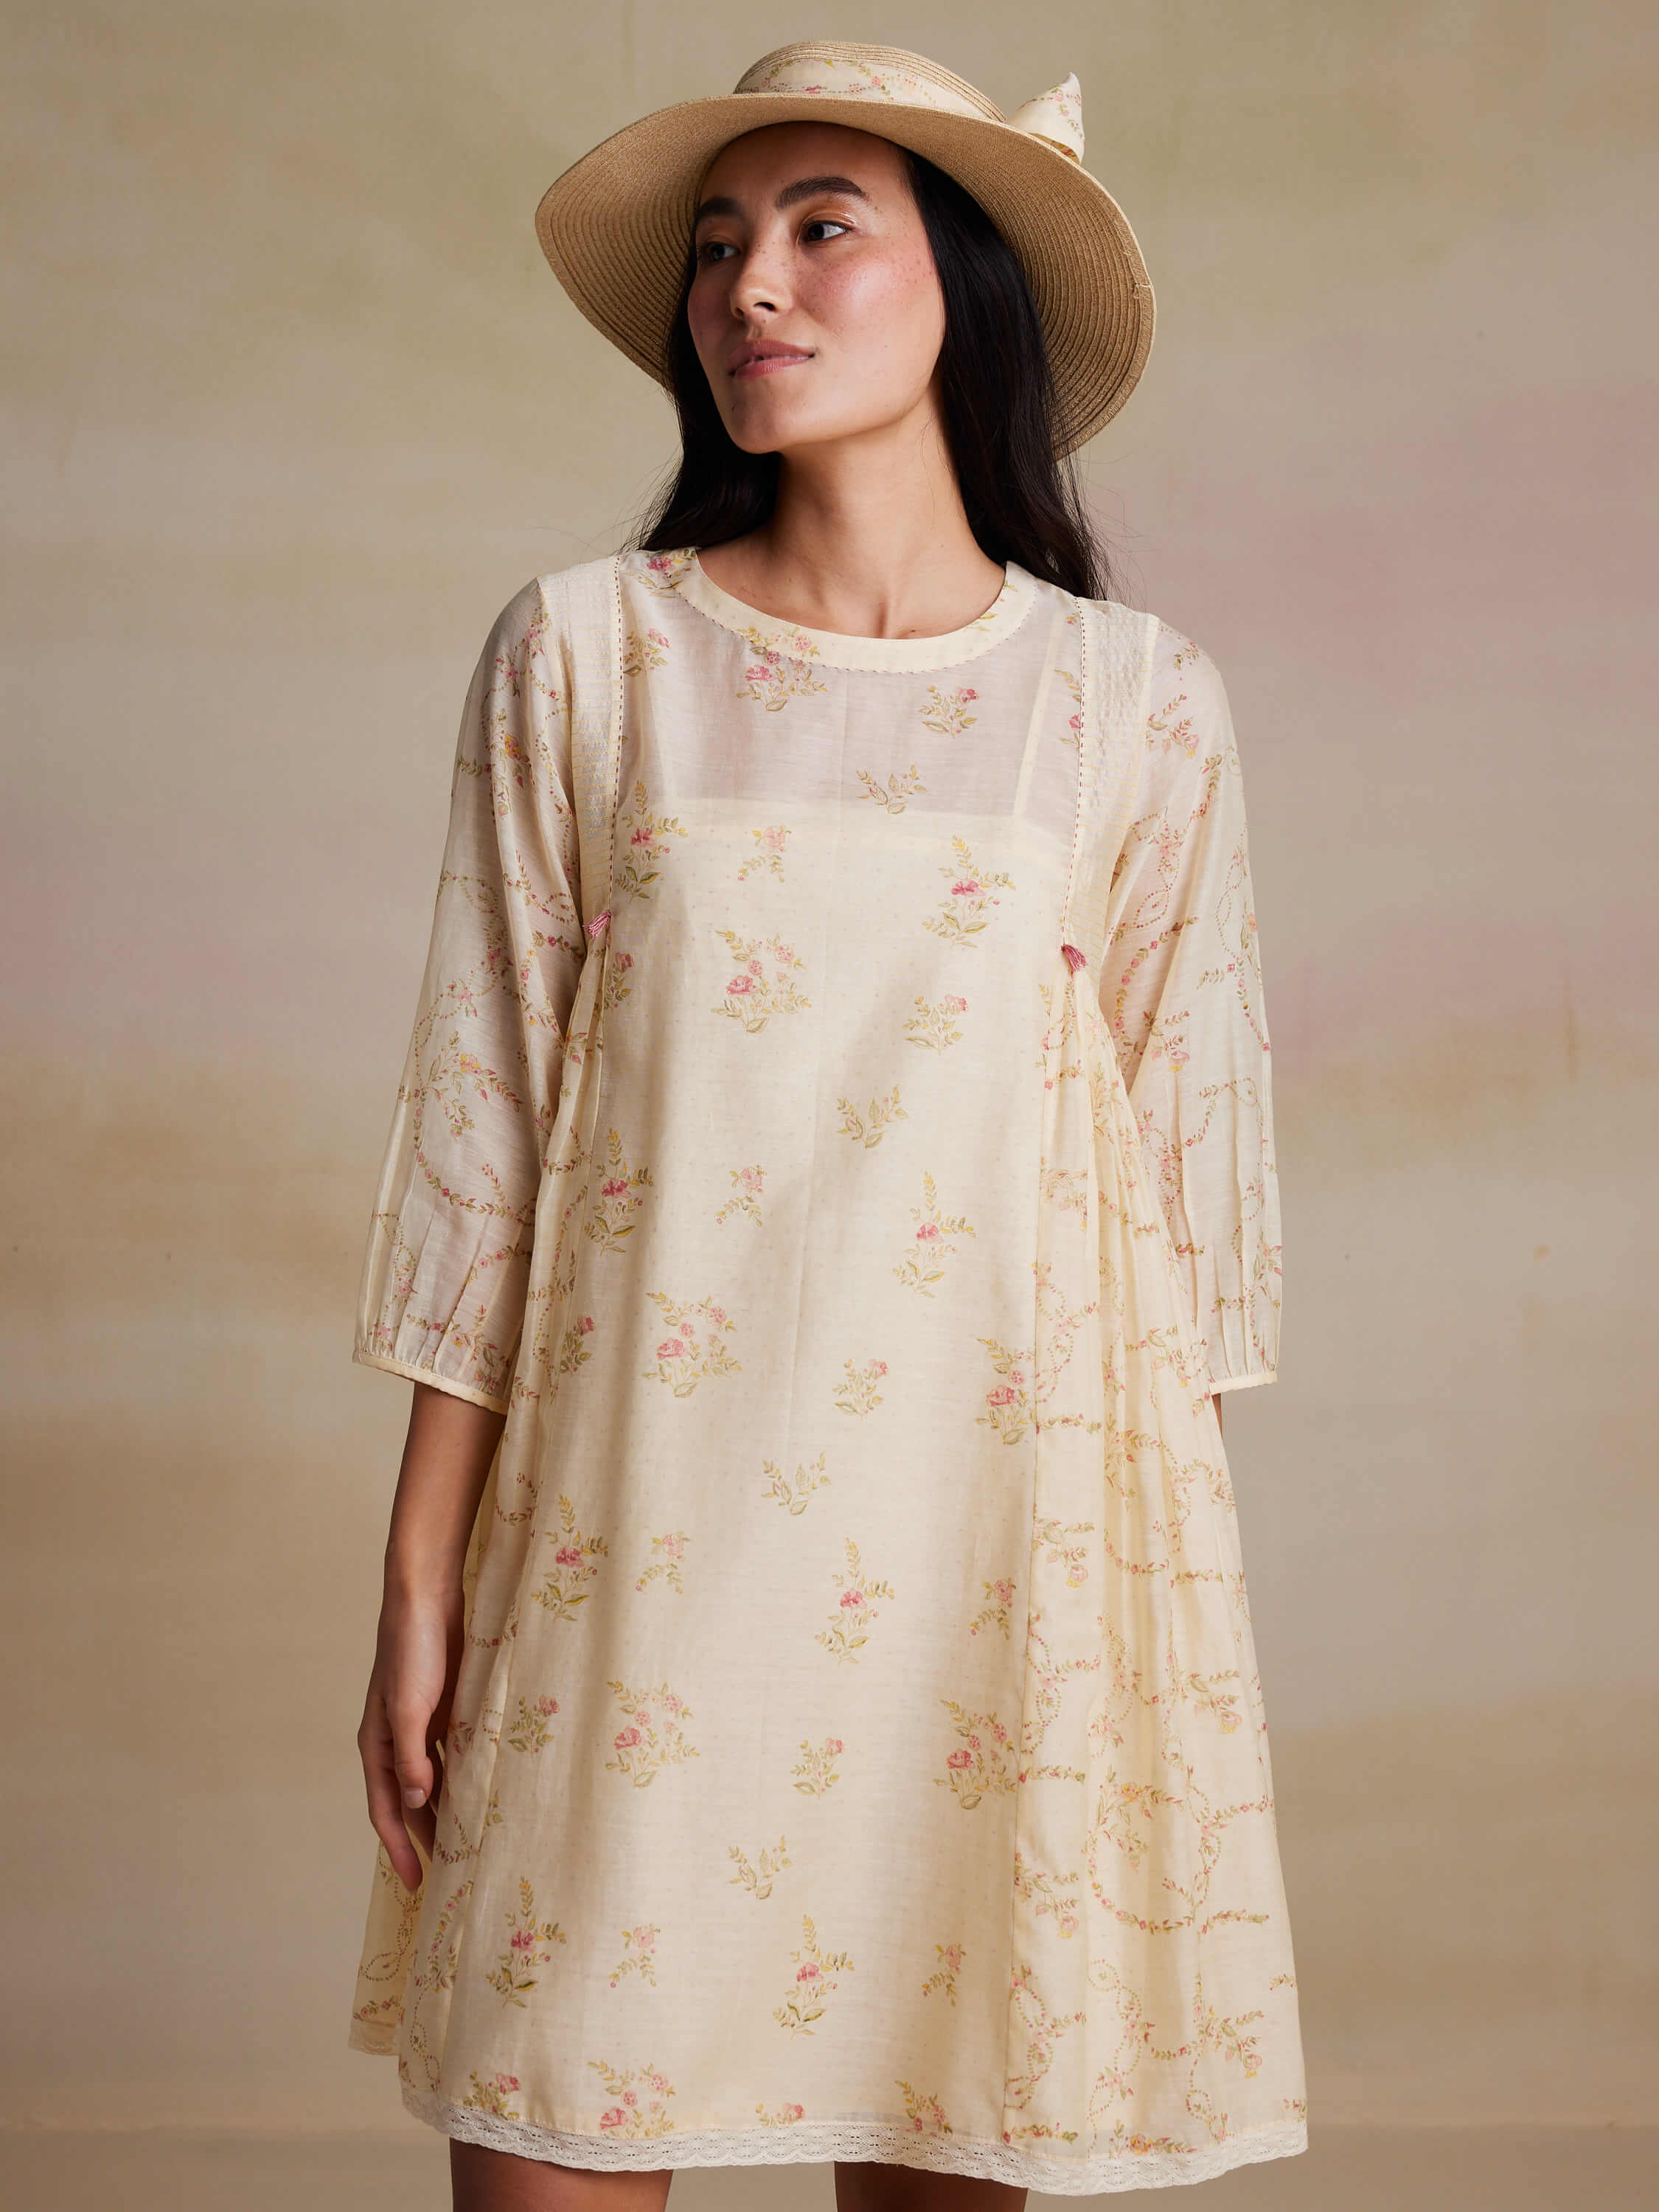 Woman wearing a floral dress and sunhat in neutral background.